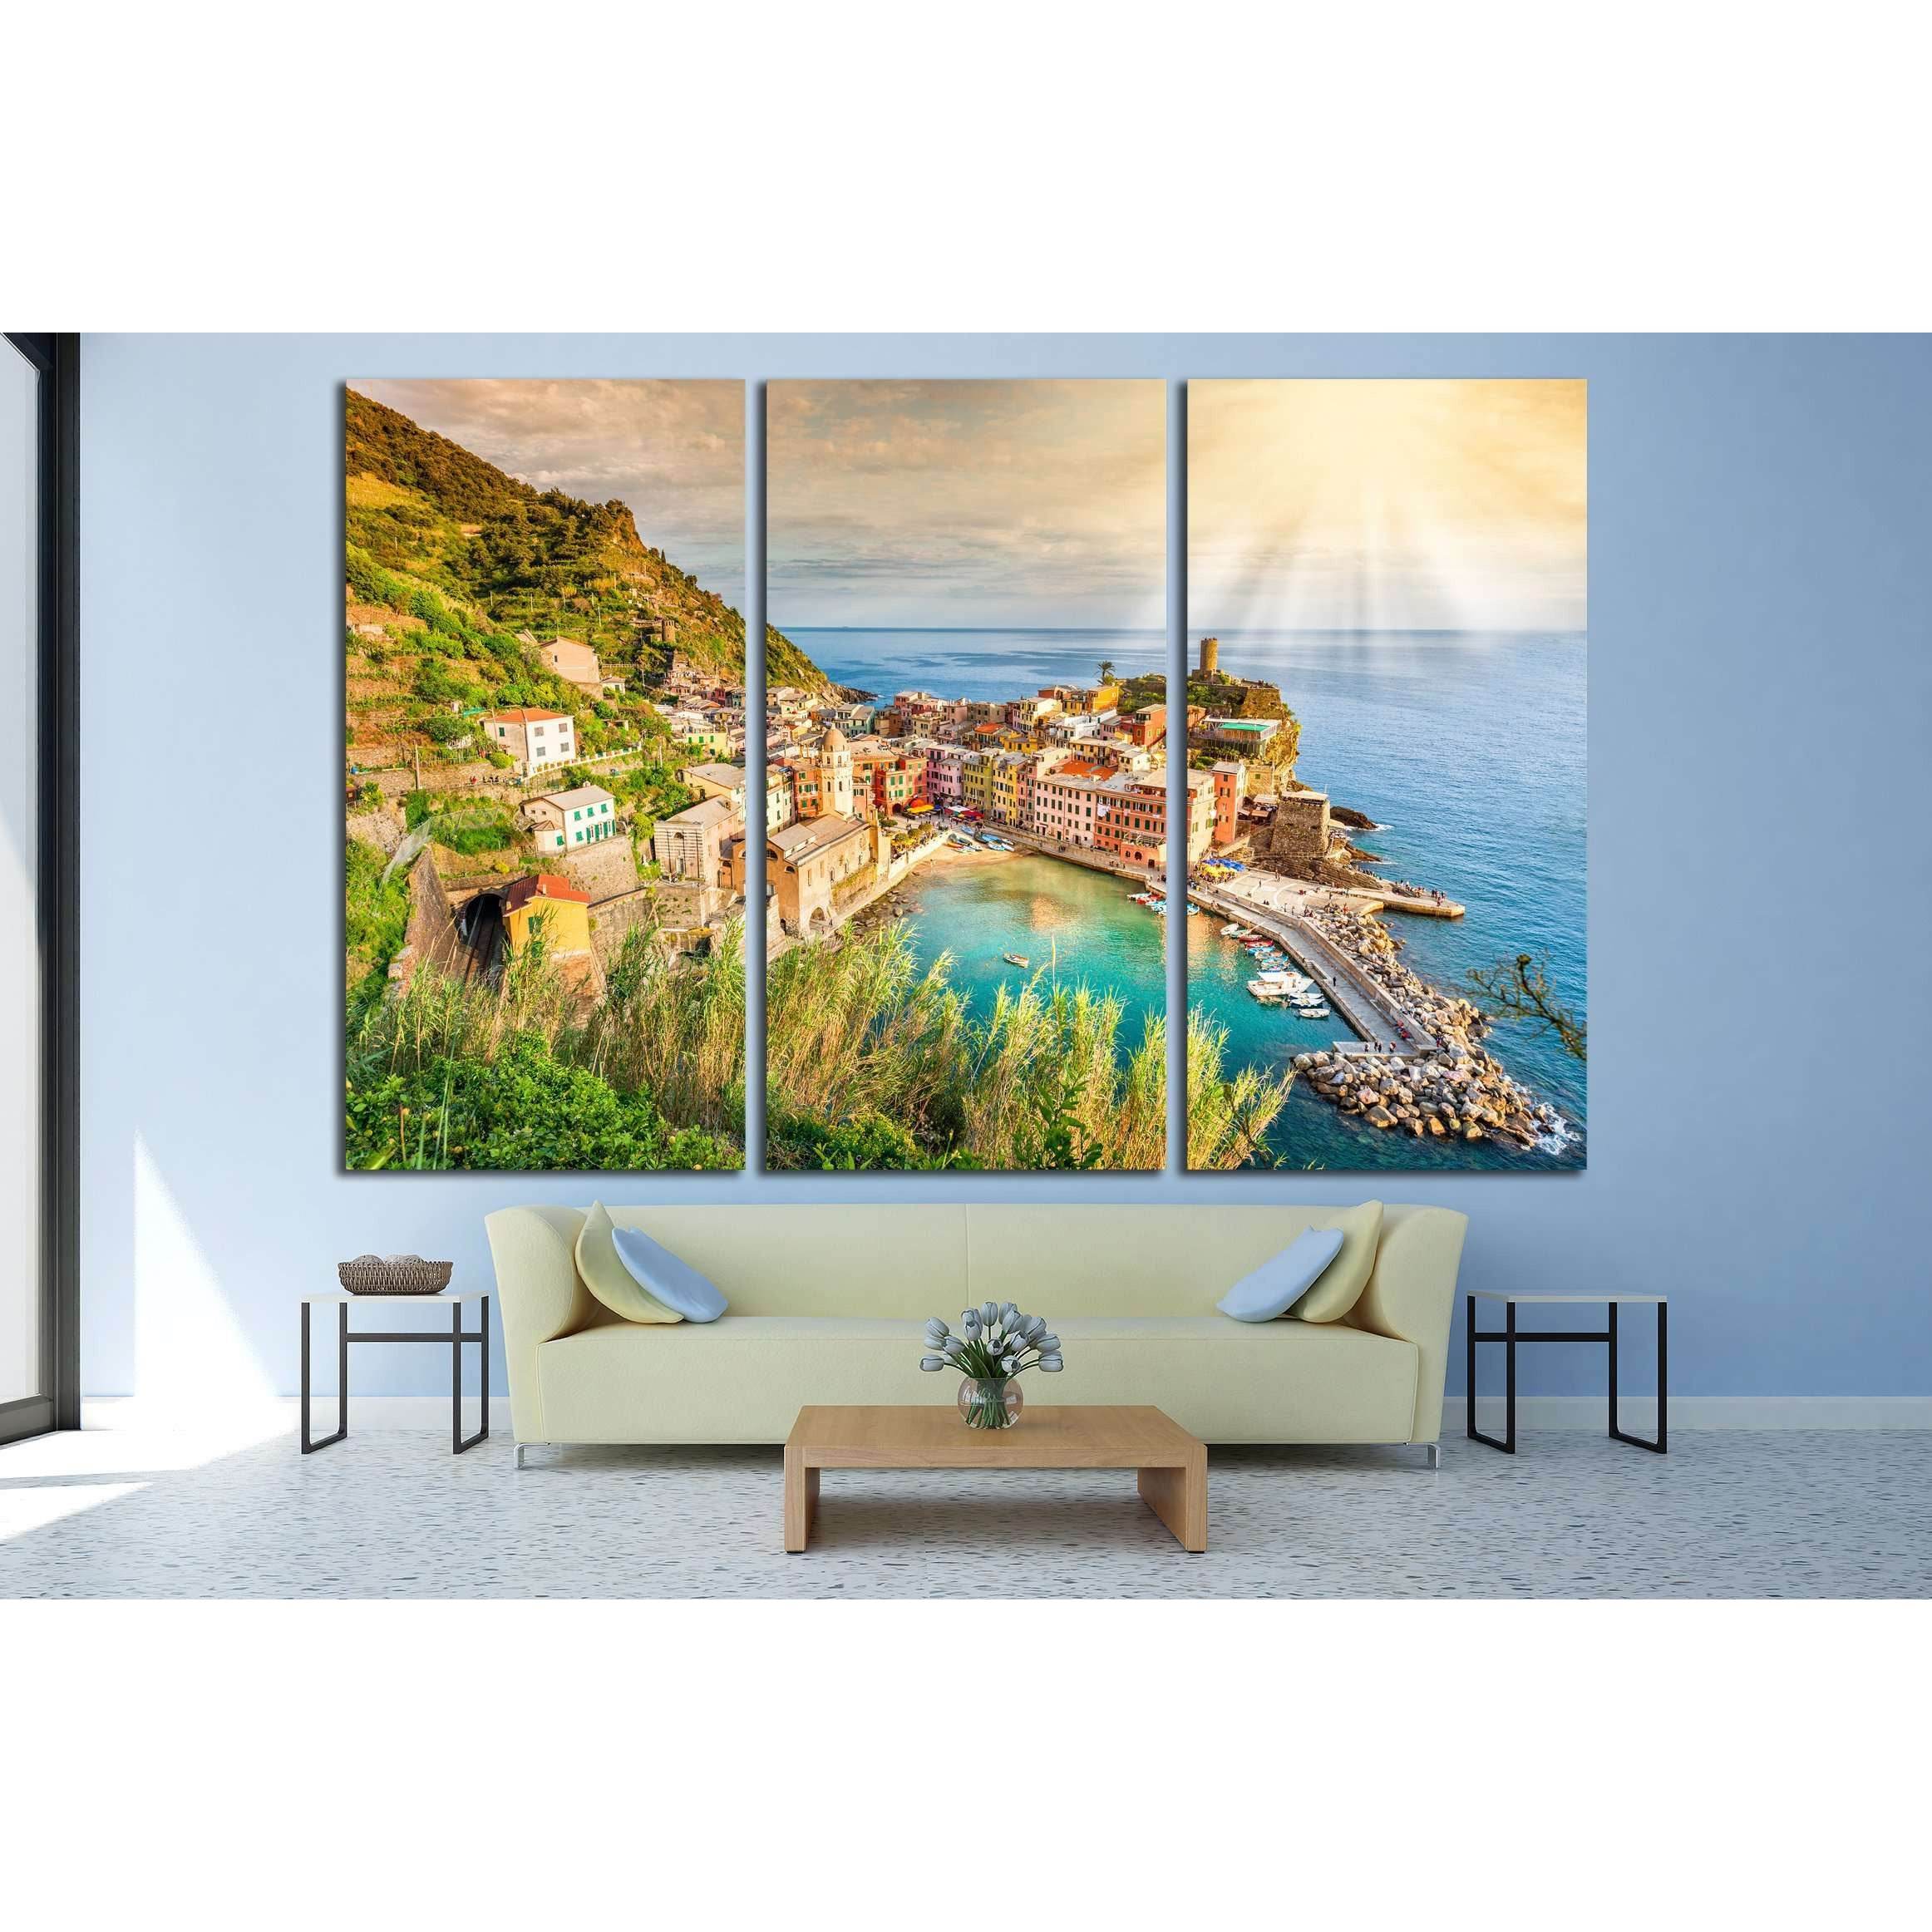 Vernazza Cinque Terre Canvas Print - Italian Seaside Village Wall ArtThis canvas print beautifully captures Vernazza, one of the five centuries-old villages of Cinque Terre, Italy, characterized by its colorful houses and the quaint harbor set against the